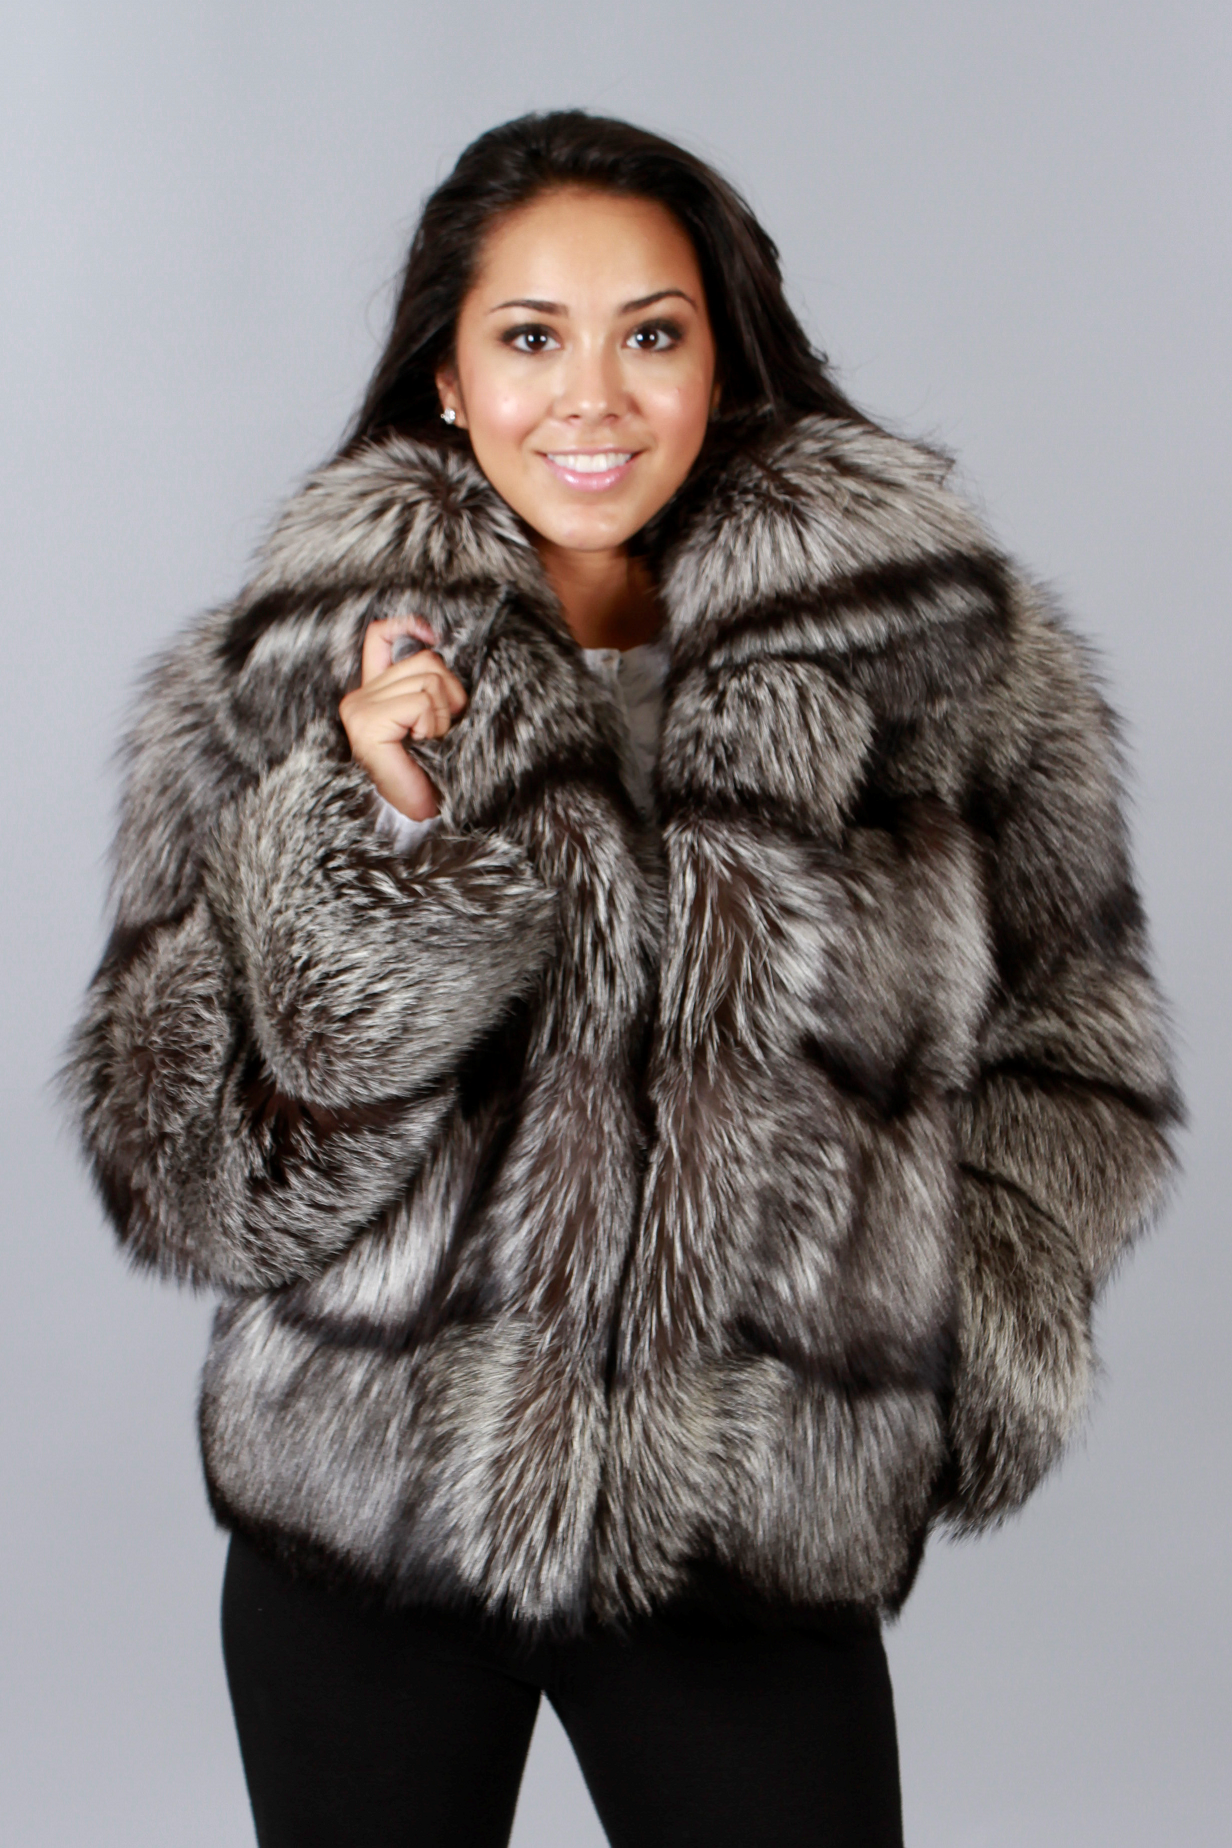 Fox Fur Coats Are a Great Addition to Your Wardrobe Morris Kaye Furs